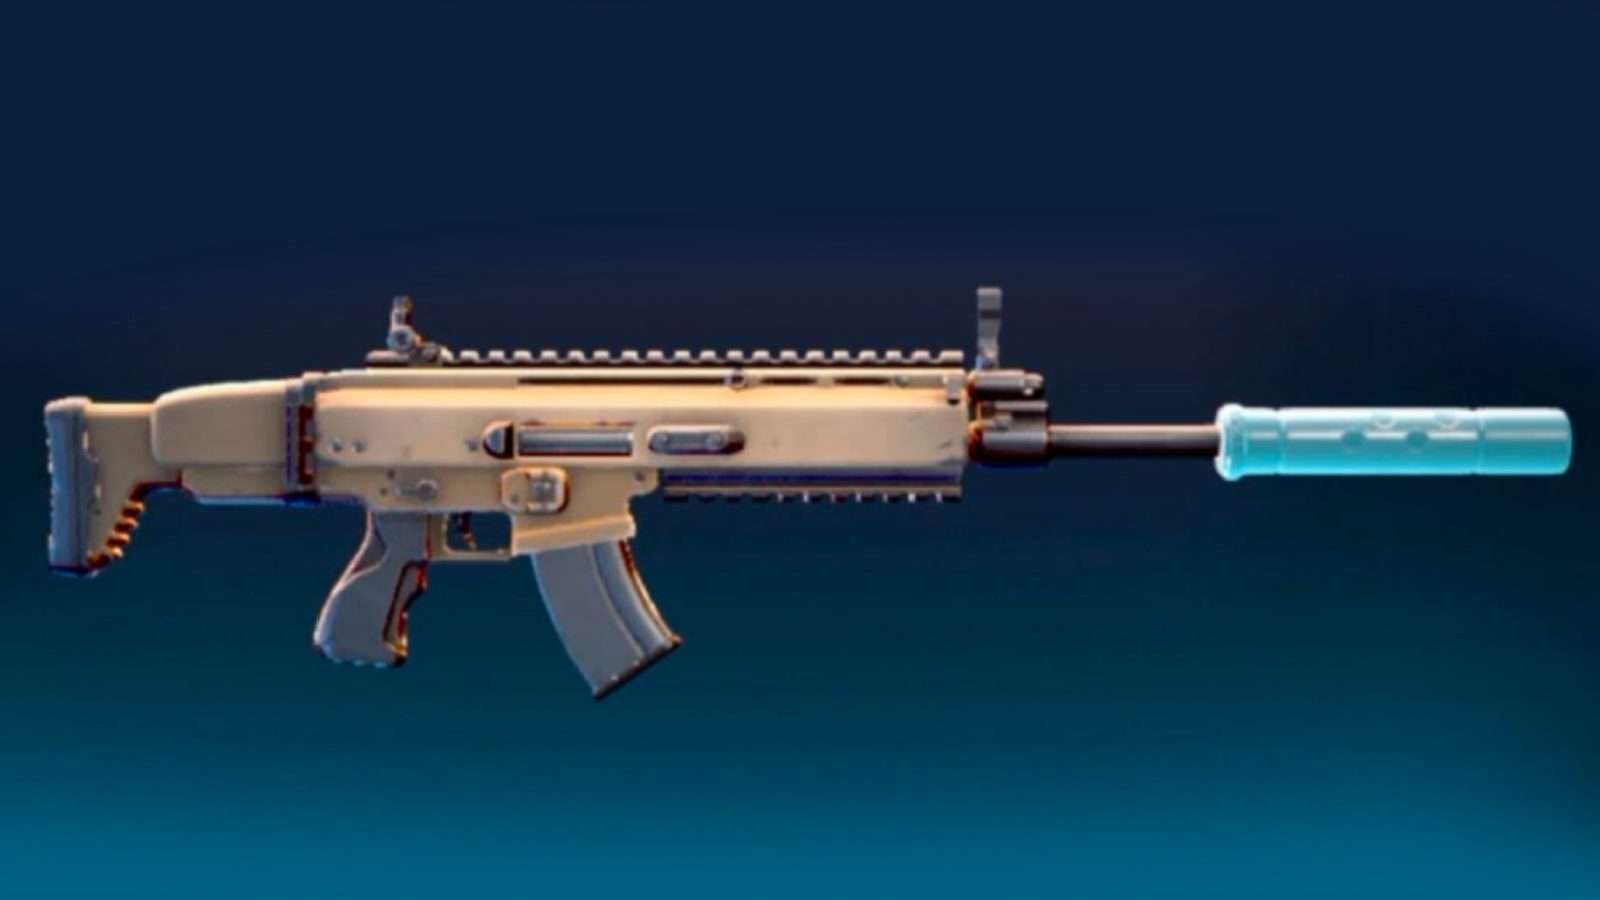 Fortnite supressed Scar weapon in the game.